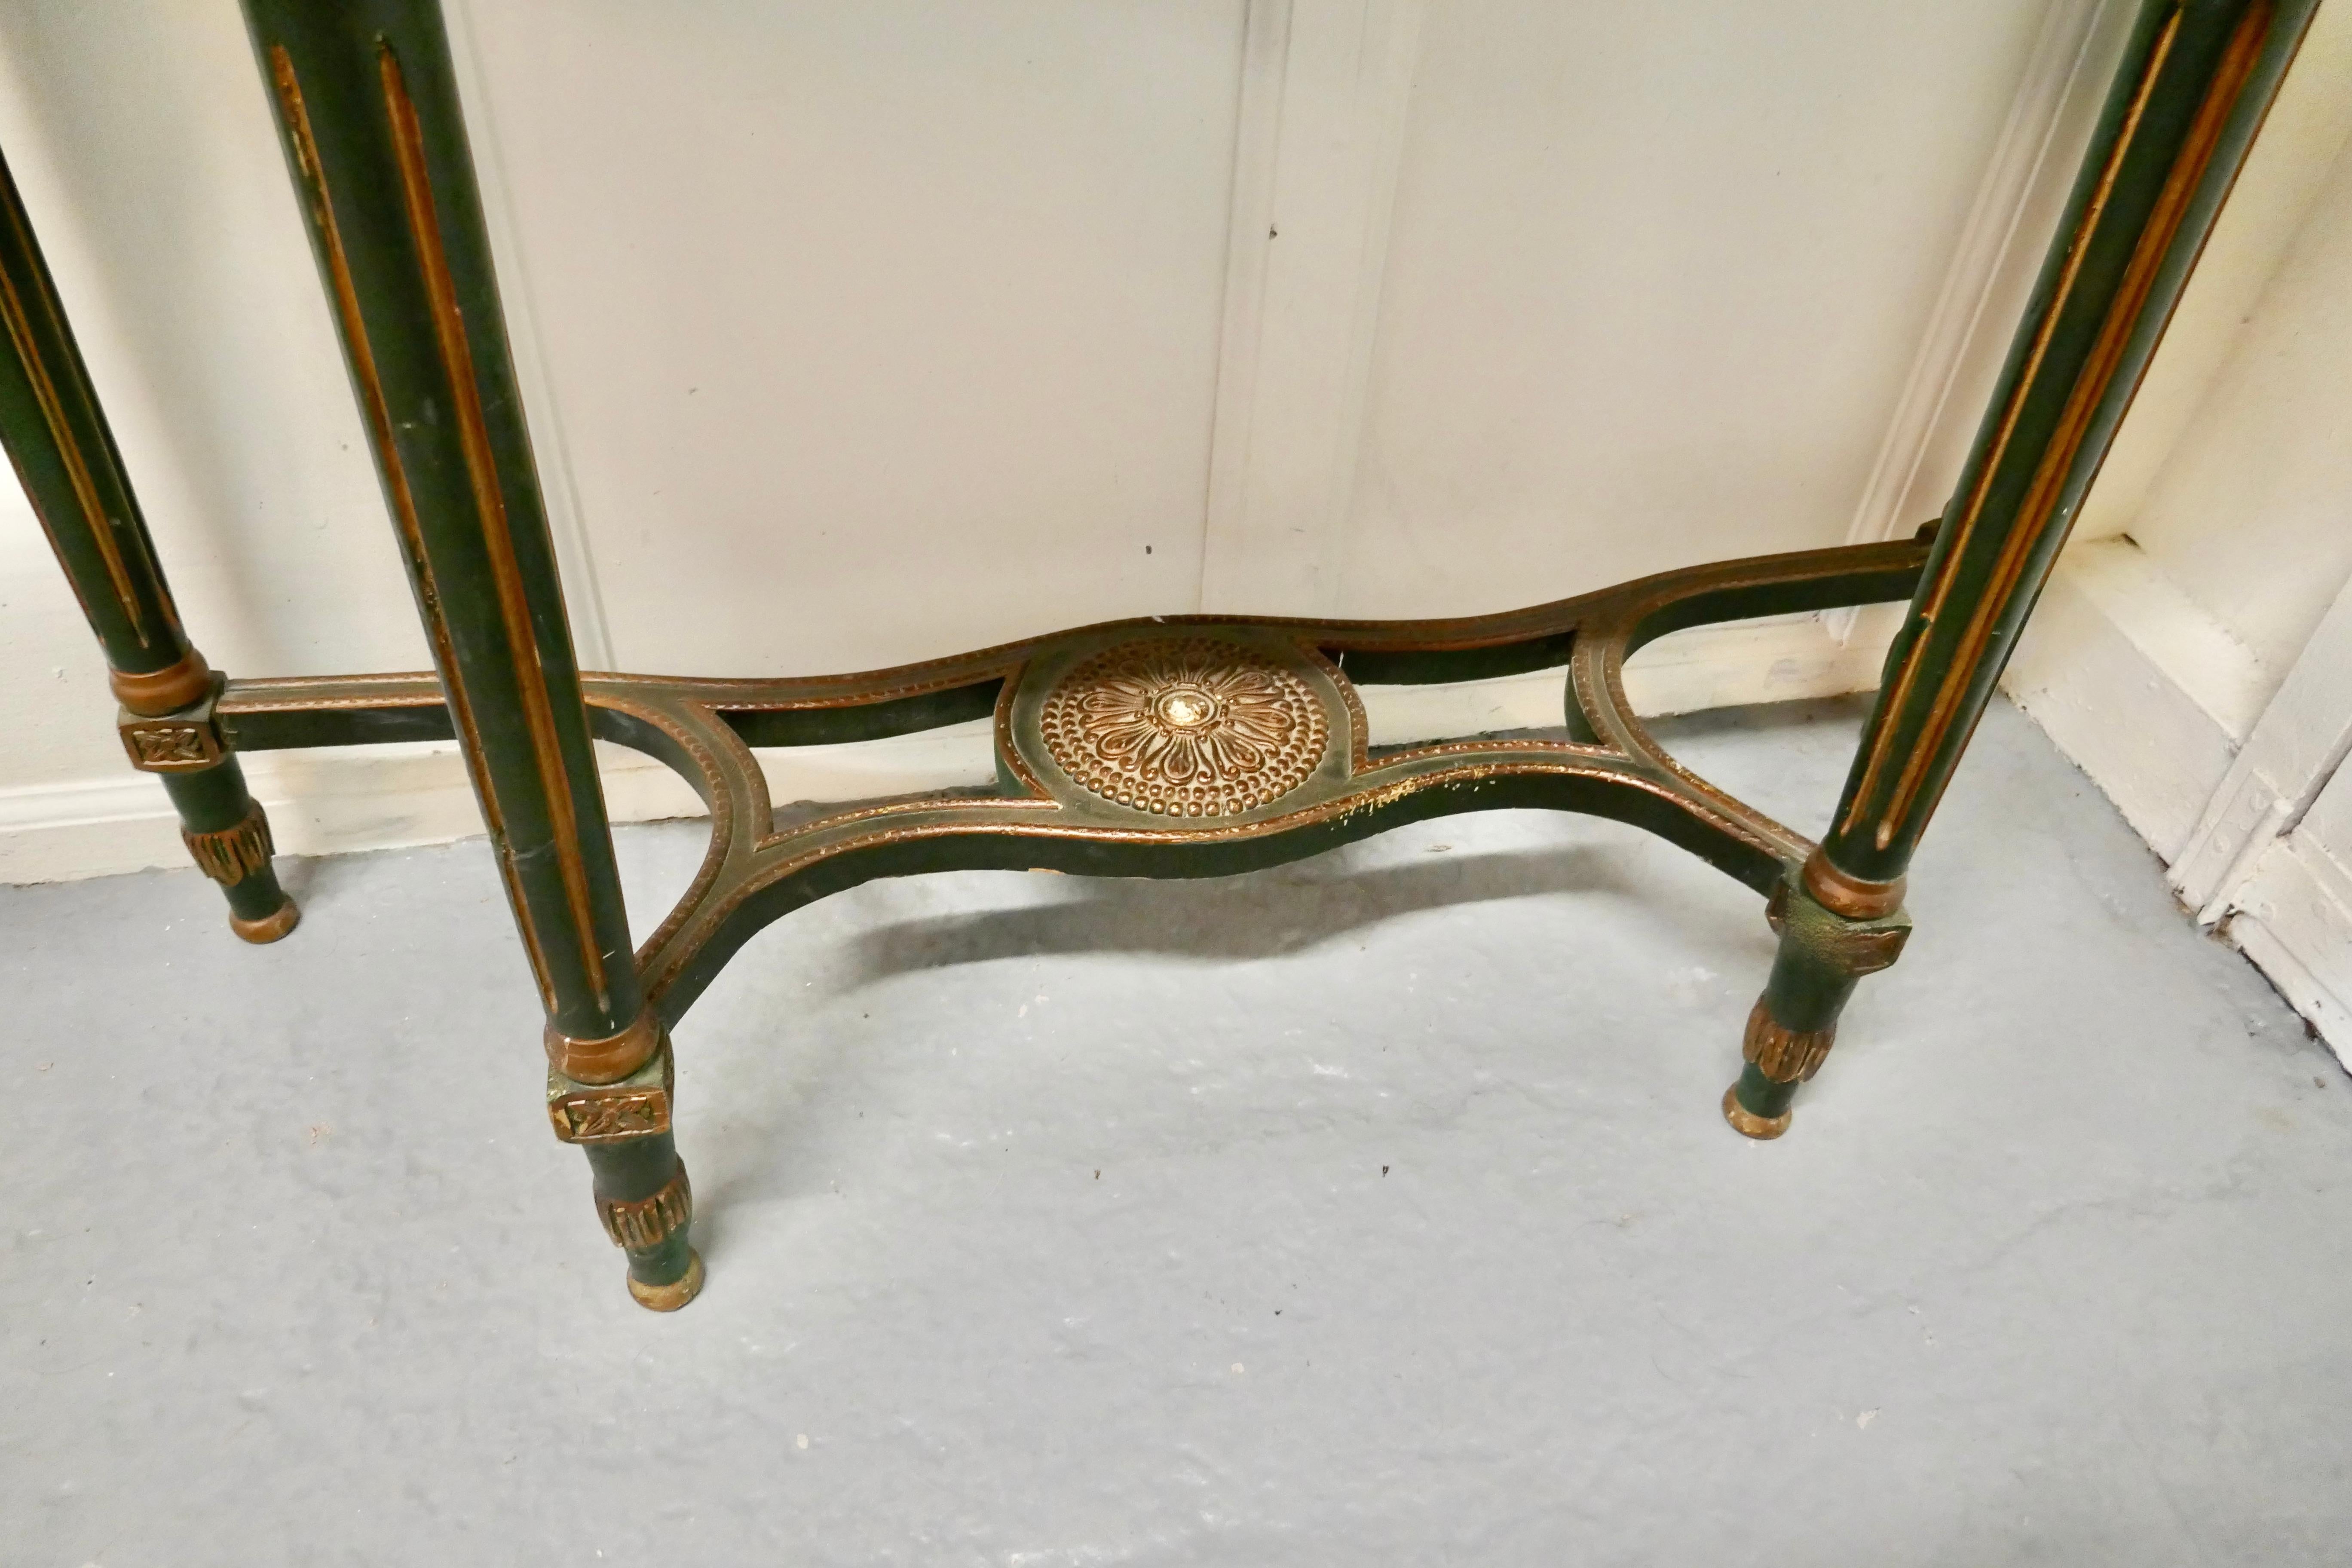 Pair of large Regency style painted console tables

This is a very attractive pair, the tables have a decorated frieze and stretcher and the fluted legs are painted in Regency stripe 
The tables Stand on elegant fluted tapering legs with a large